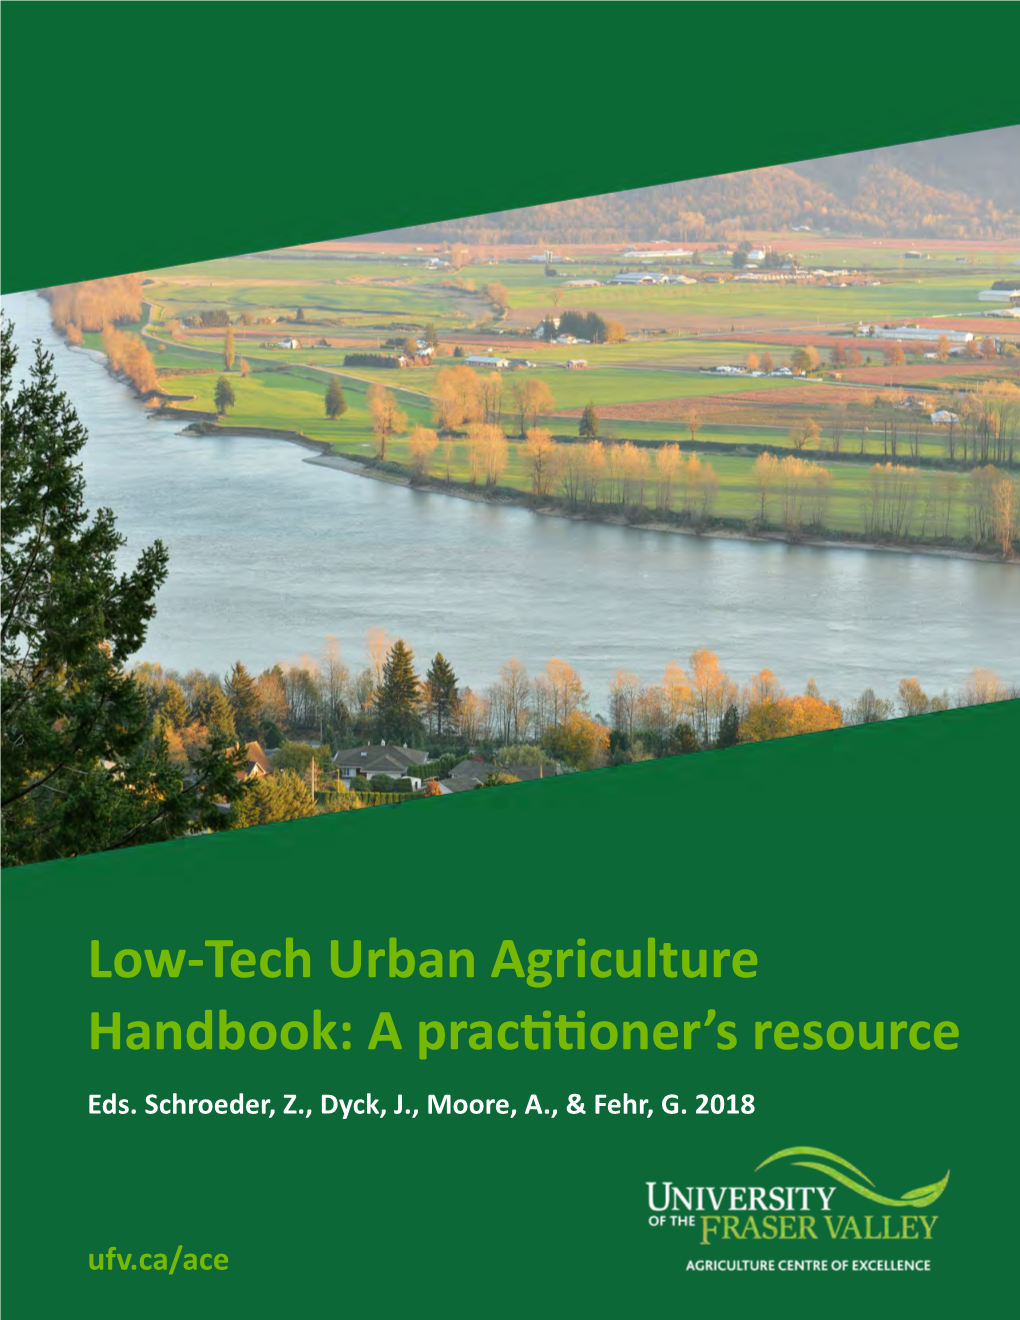 Low-Tech Urban Agriculture Handbook: a Practitioner's Resource